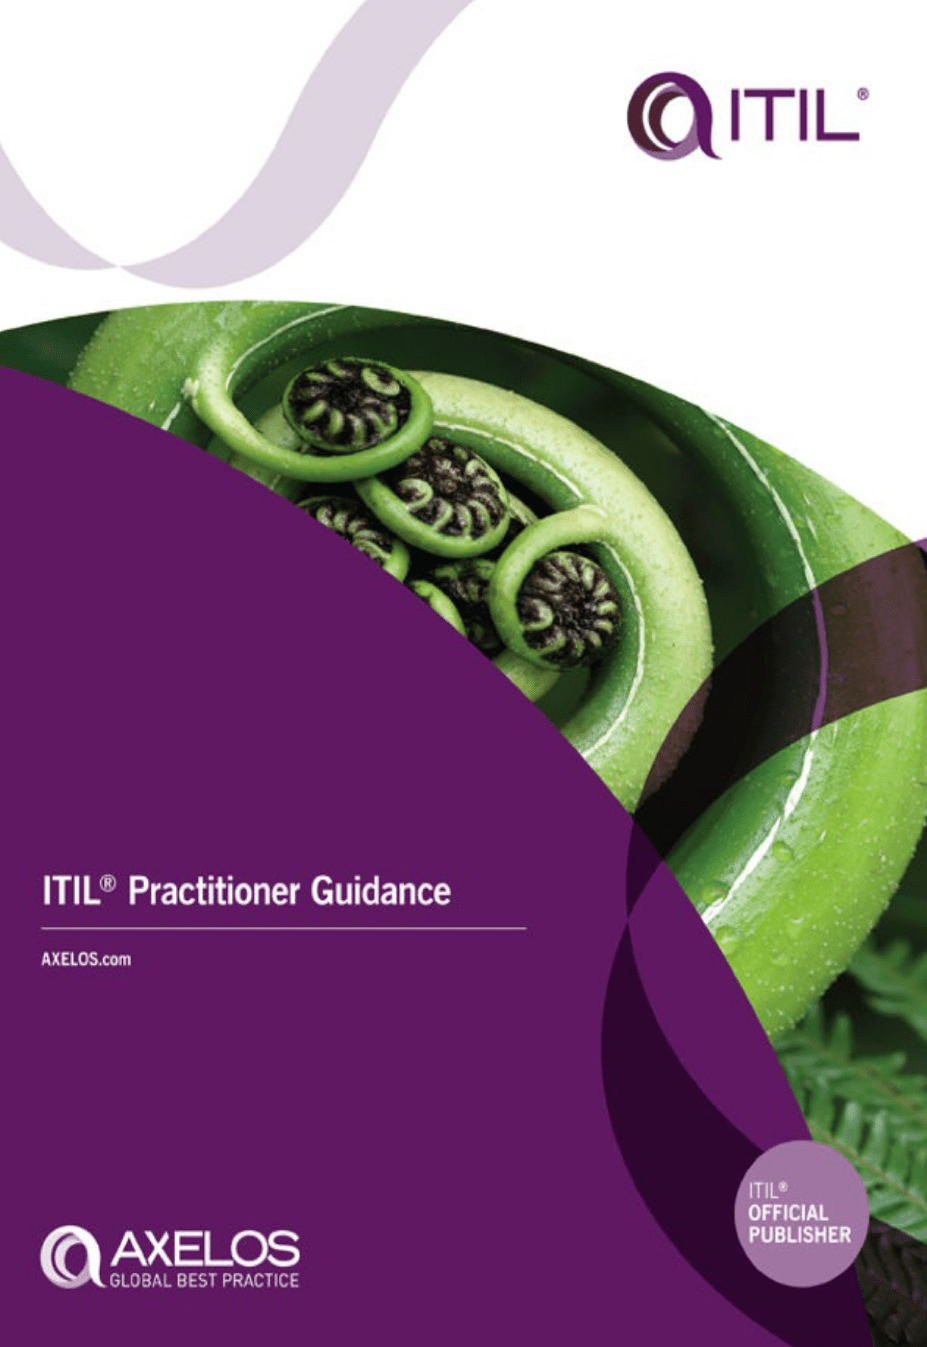 ITIL® Practitioner Guidance on E-Book.business